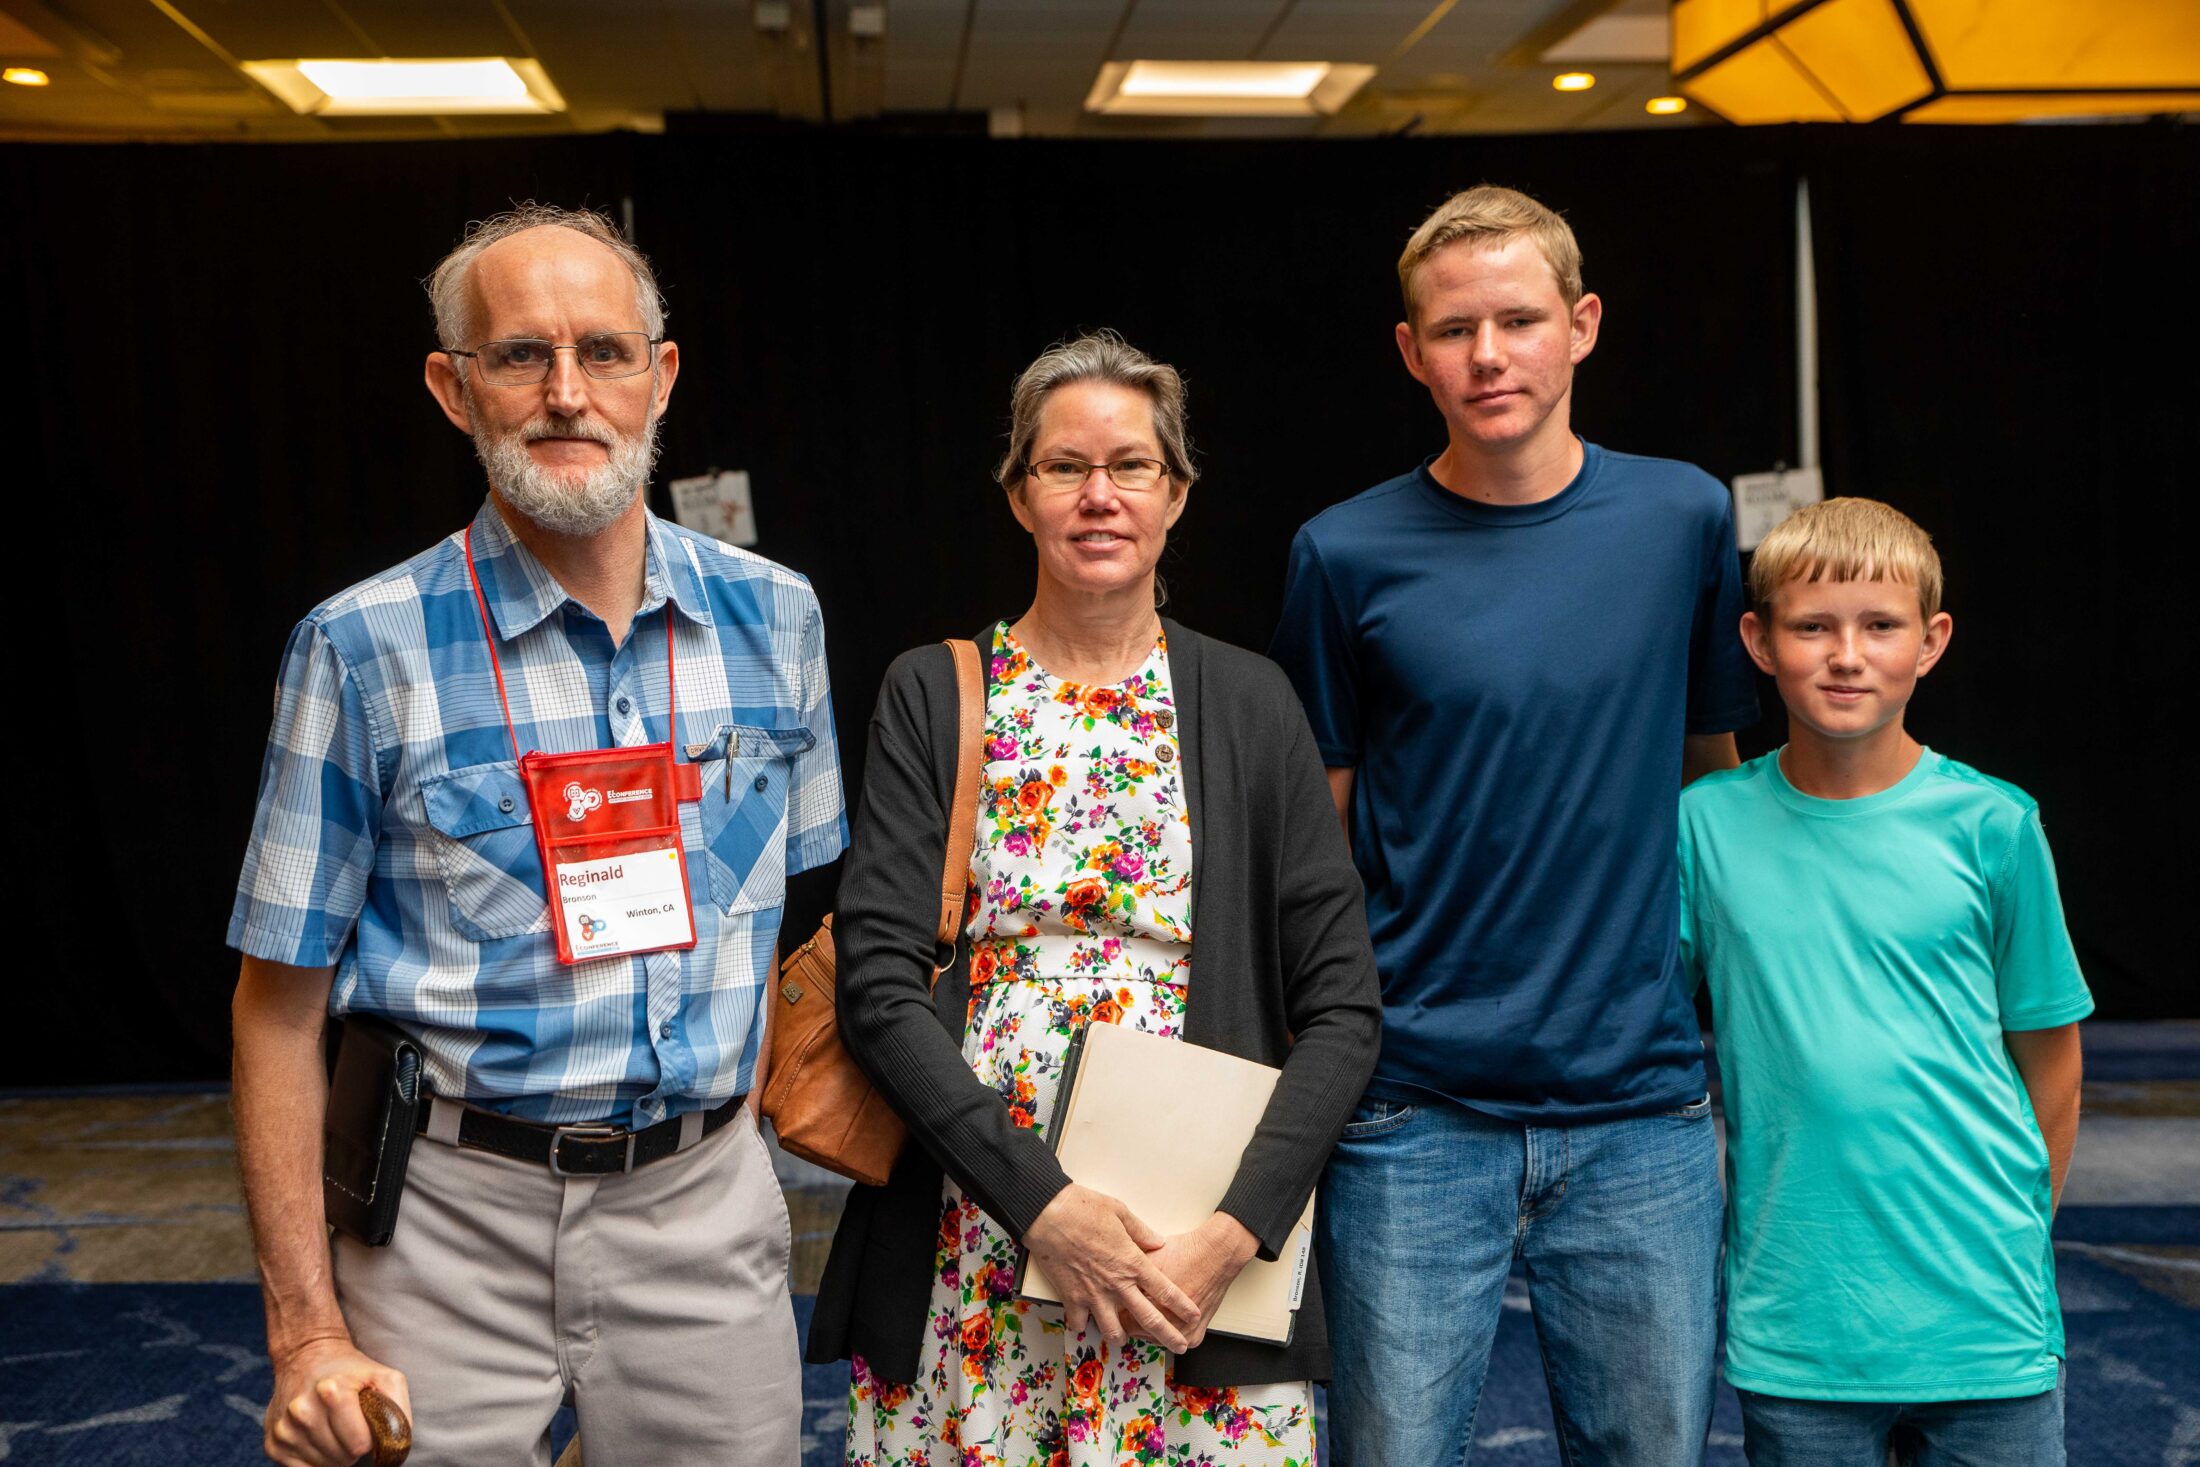 Reg attending Conference with his wife, Edith, and their two sons.